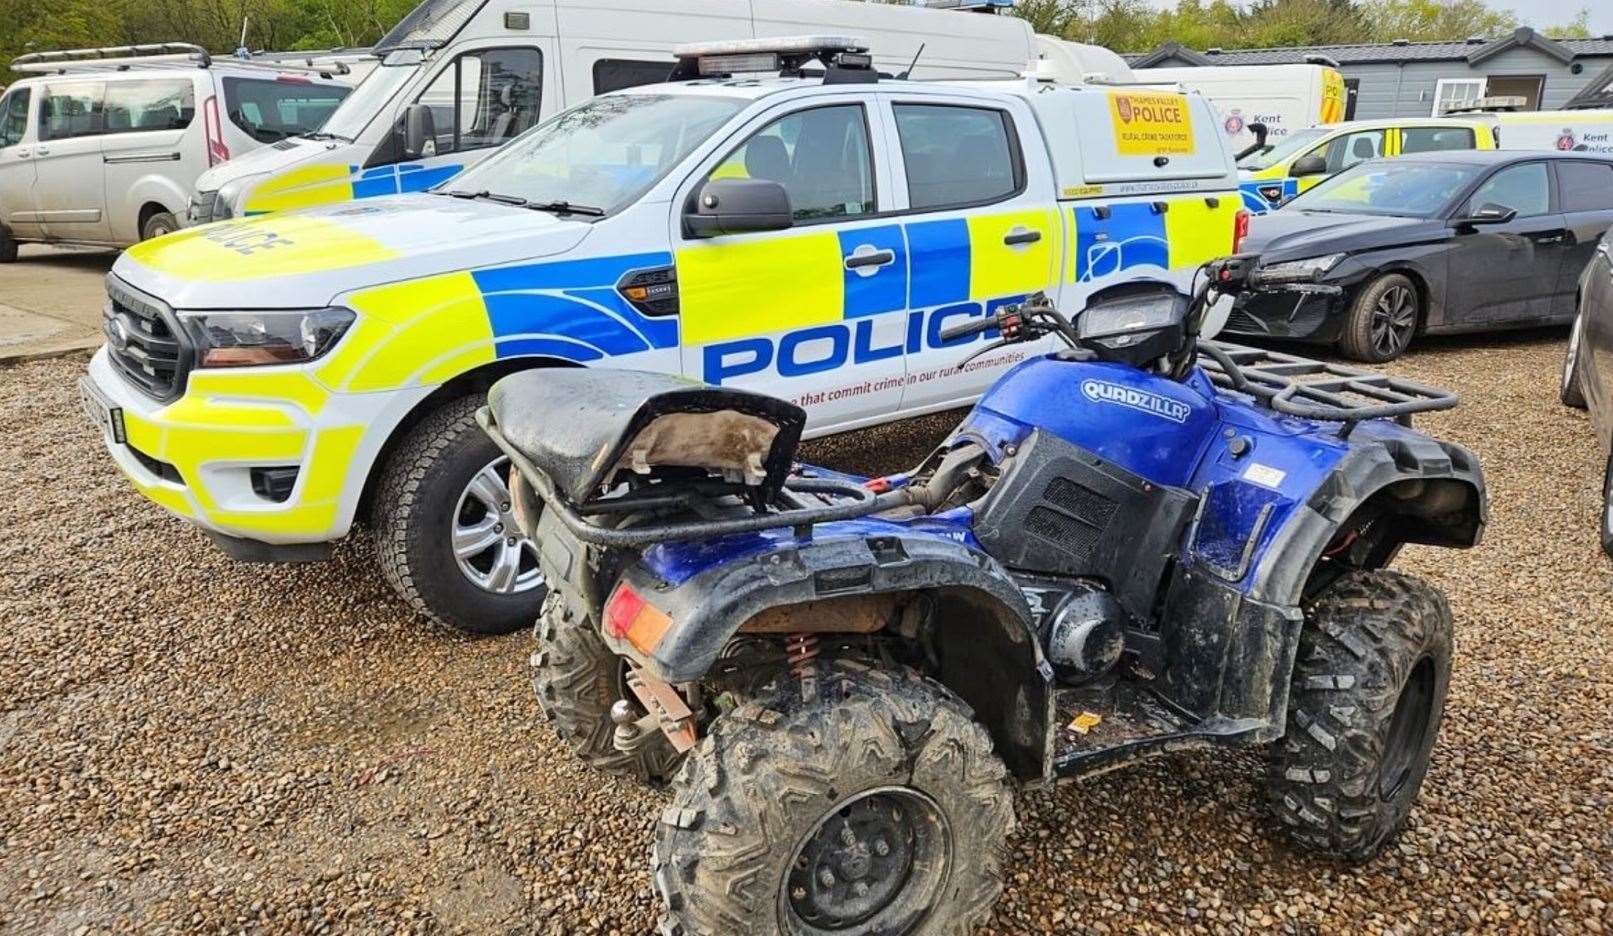 A quad bike was also recovered. Picture: TVP Rural Crime Taskforce